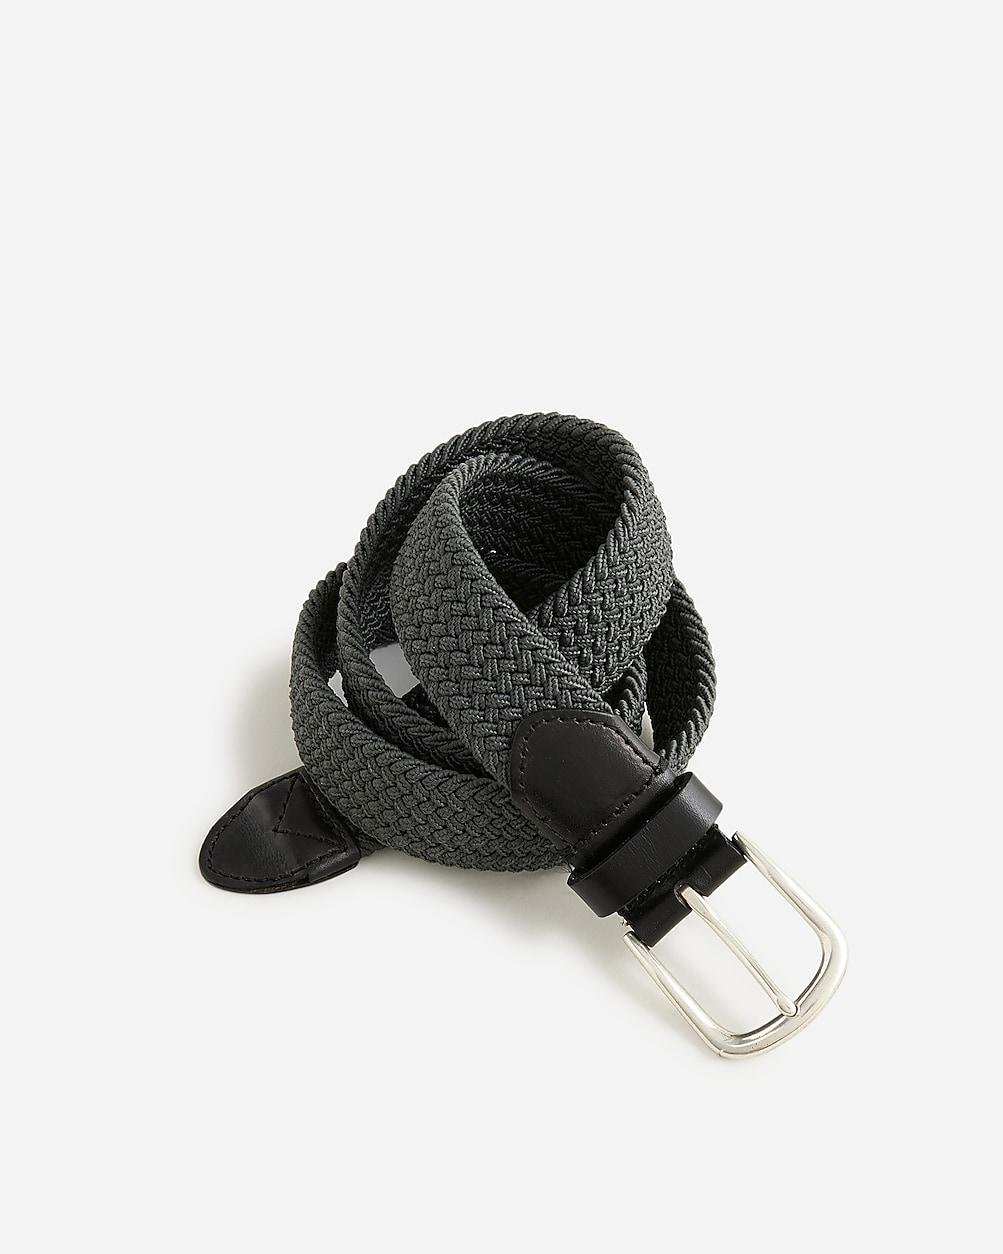 Woven elastic belt with round buckle by J.CREW